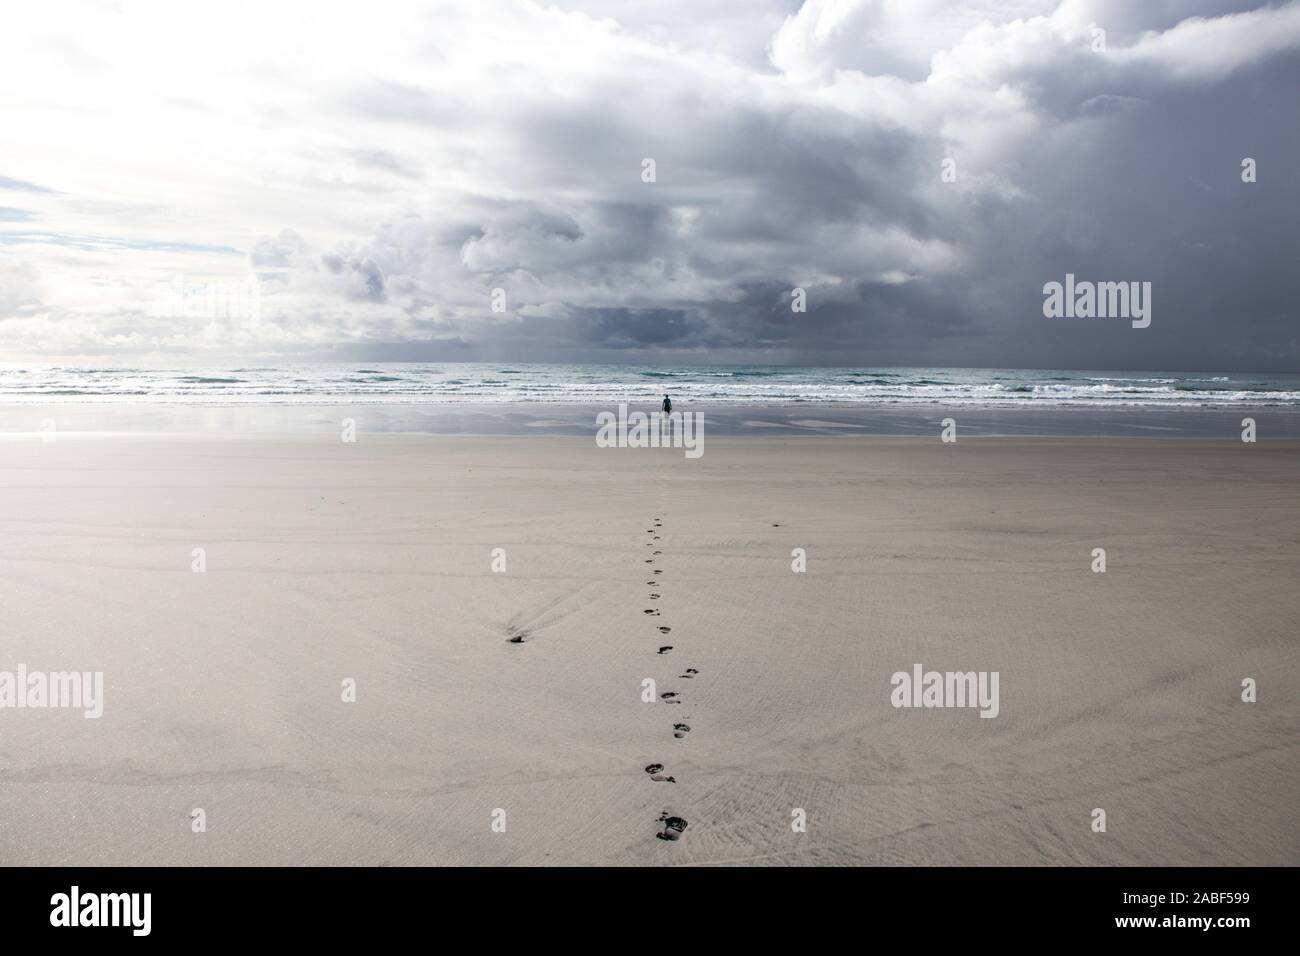 Woman in distance standing against rough sea on very long beach under dramatic cloudy sky with straight track of footprints leading to her. Fossil Poi Stock Photo